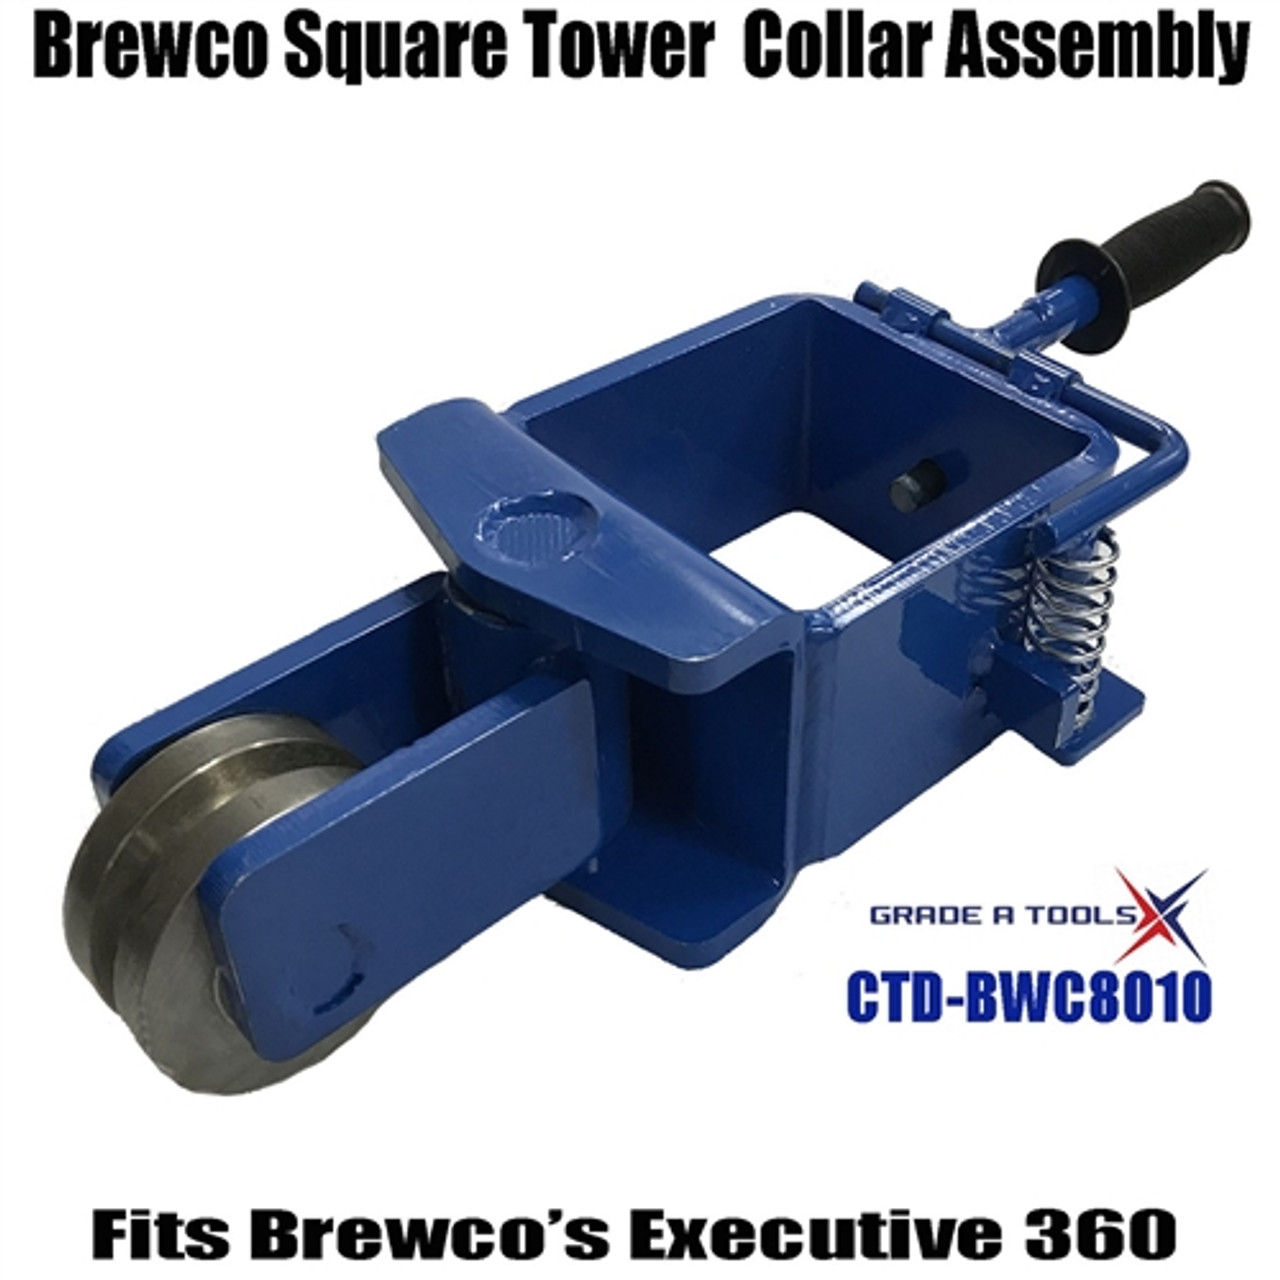 Brewco Square Tower Collar Assembly